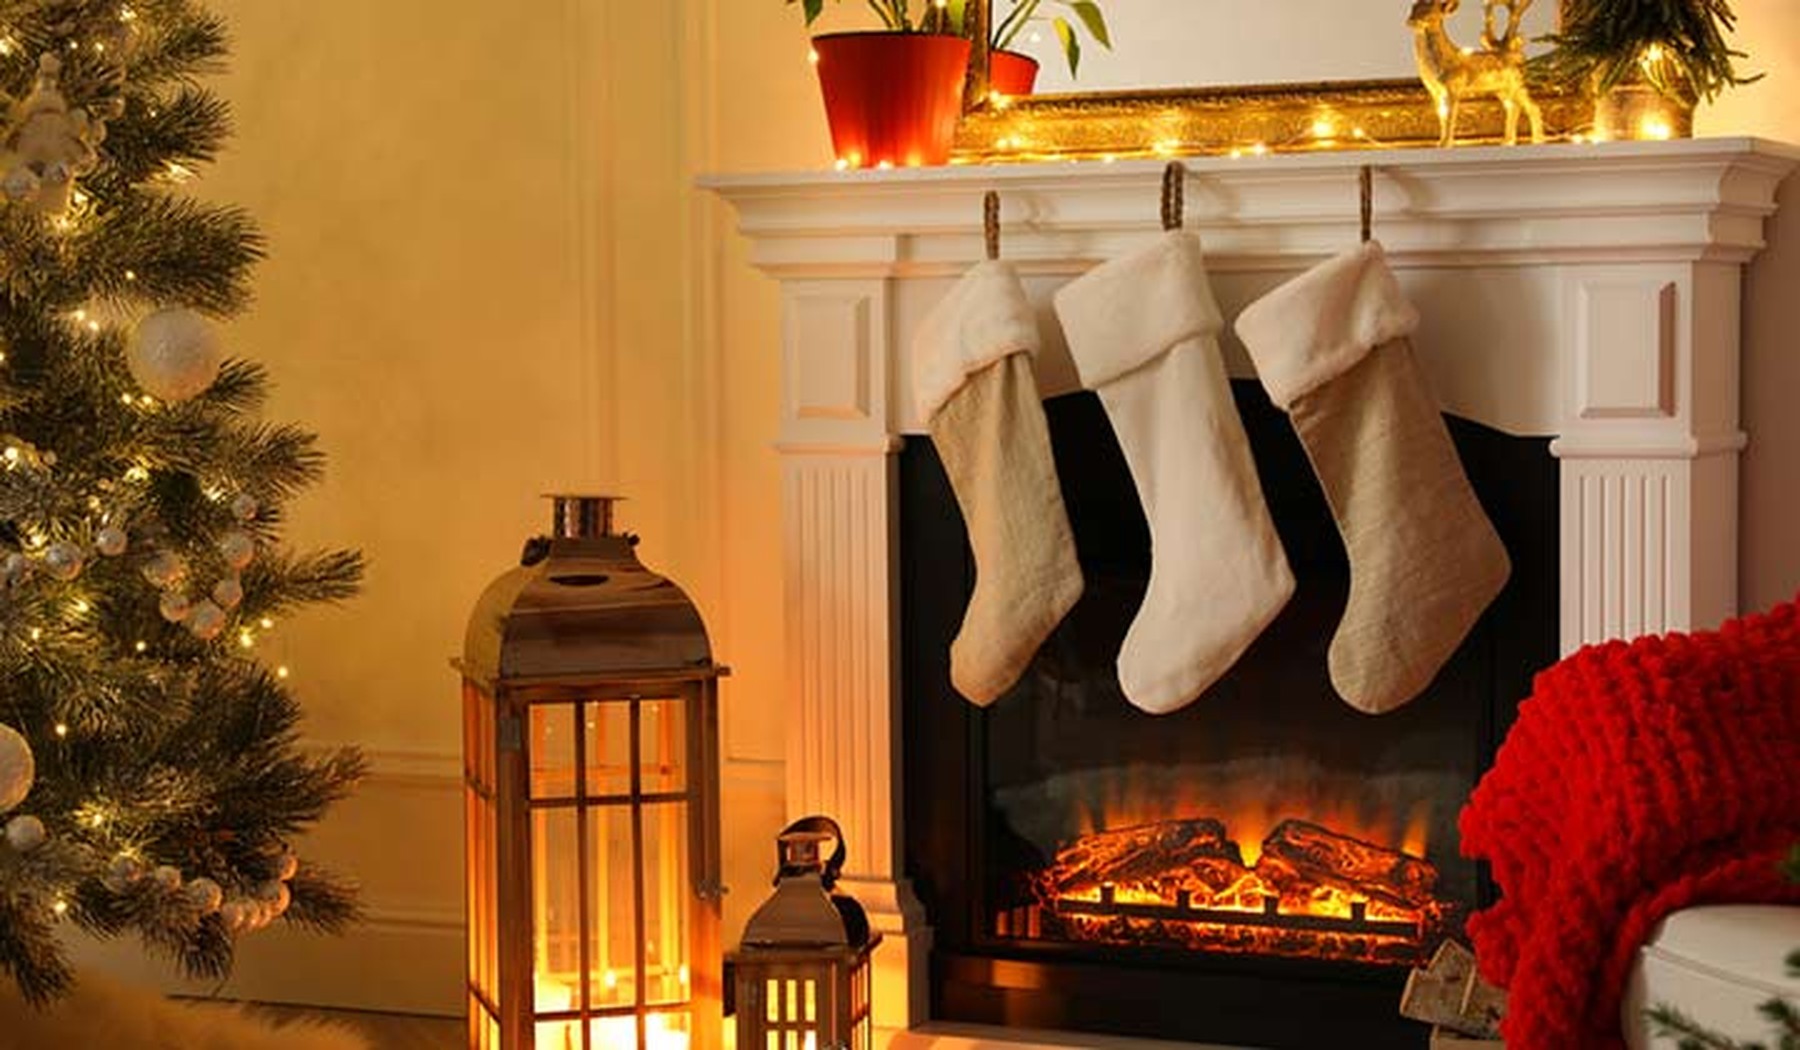 Christmas tree and stockings hung on a fireplace